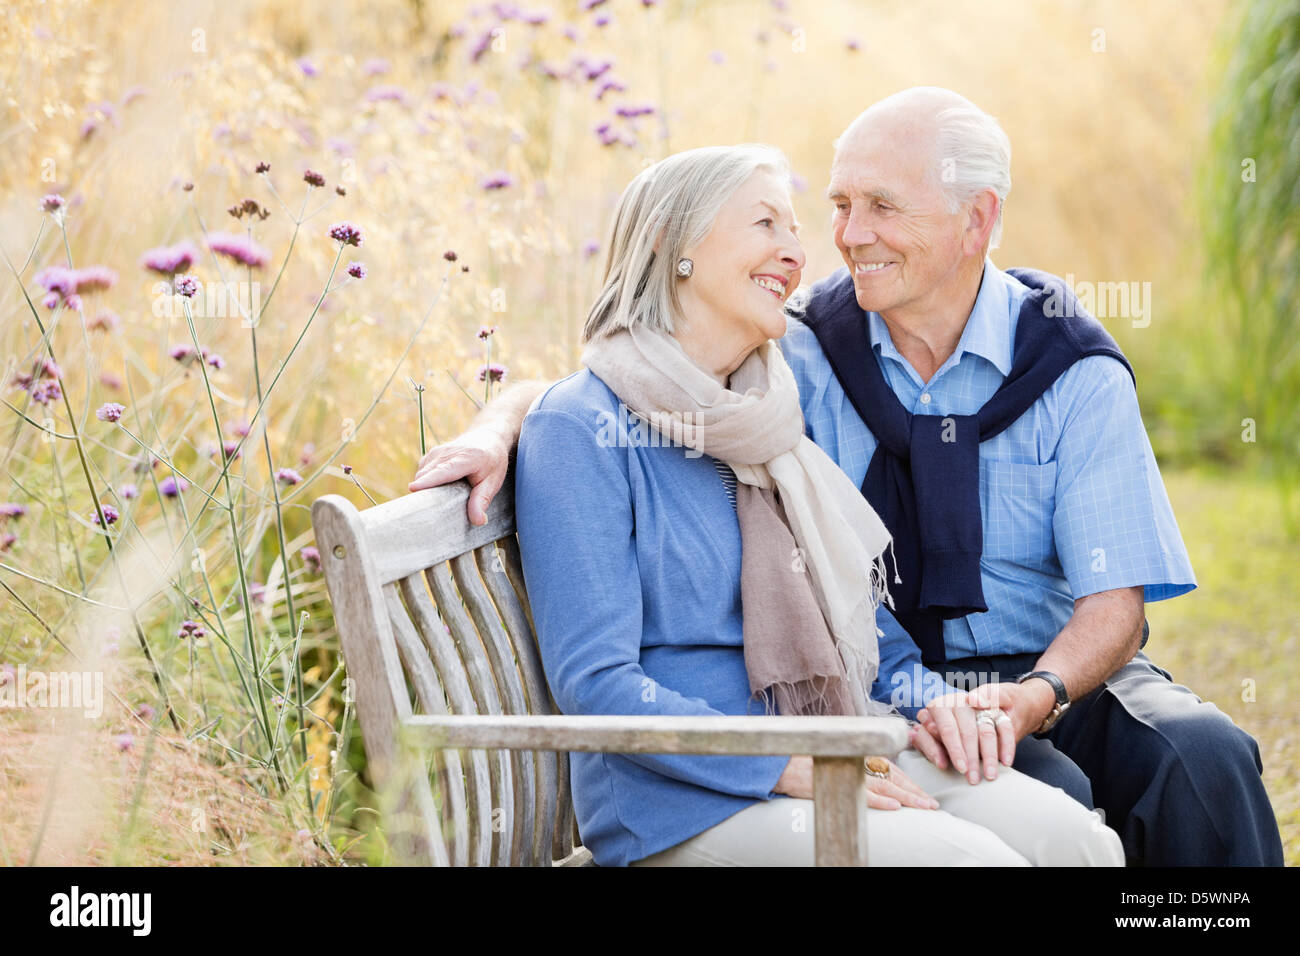 Older couple relaxing on park bench Stock Photo